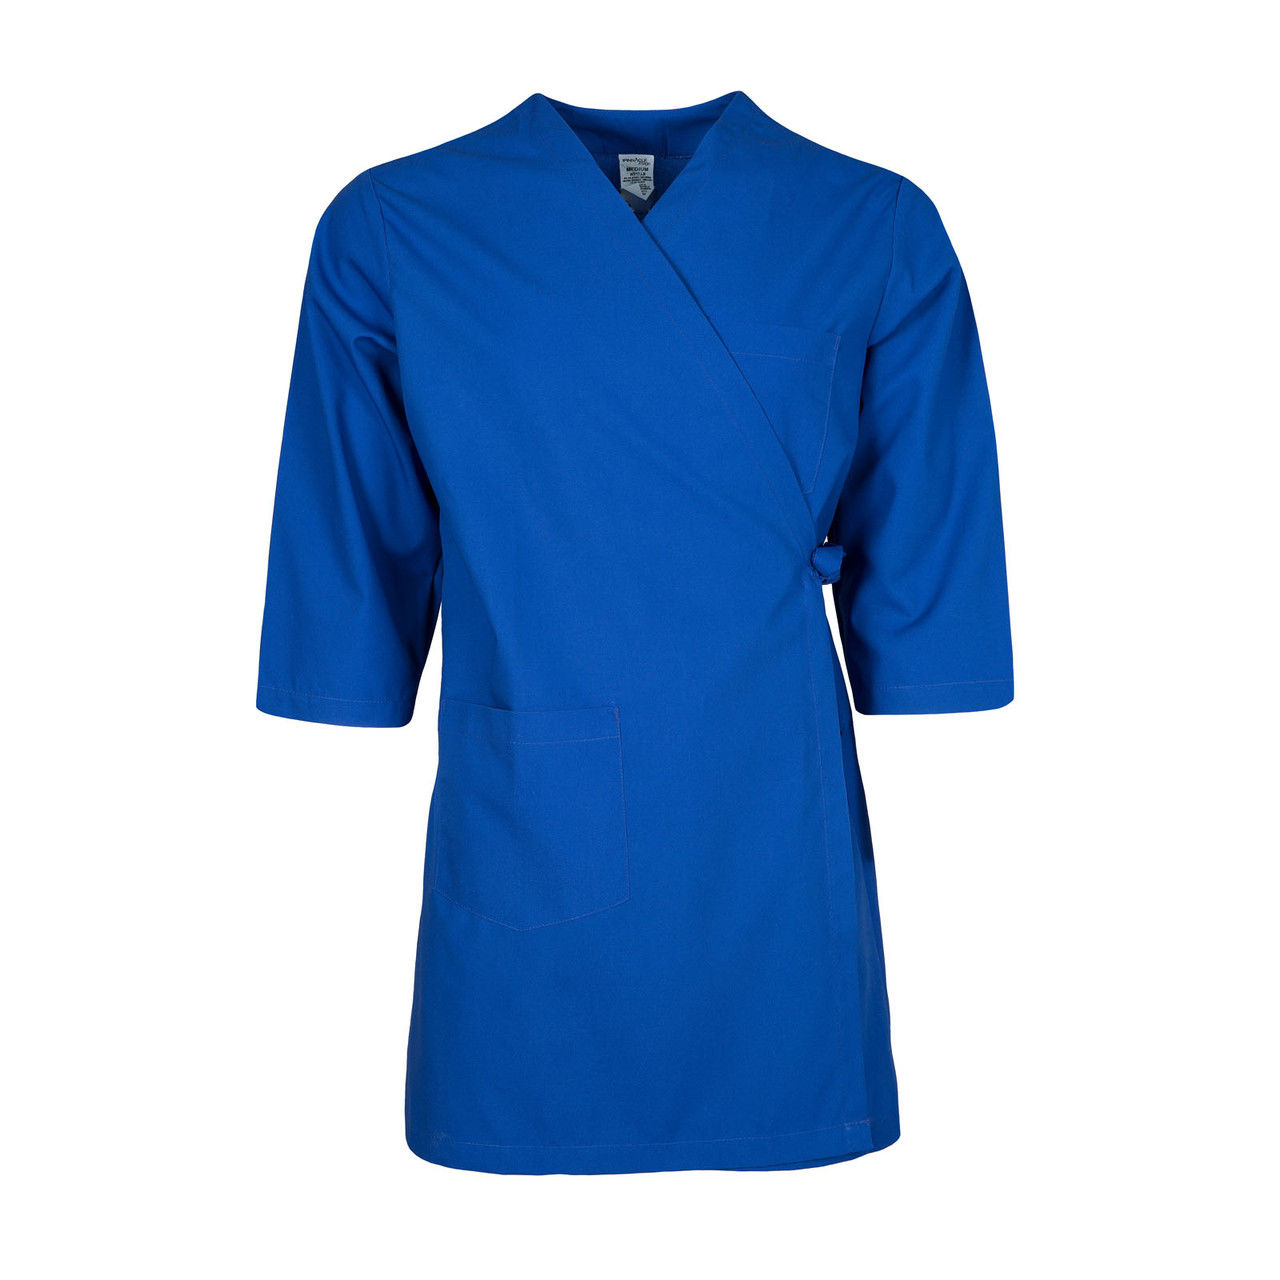 What sizes is the Royal Blue Wraparound Smock Gown available in?